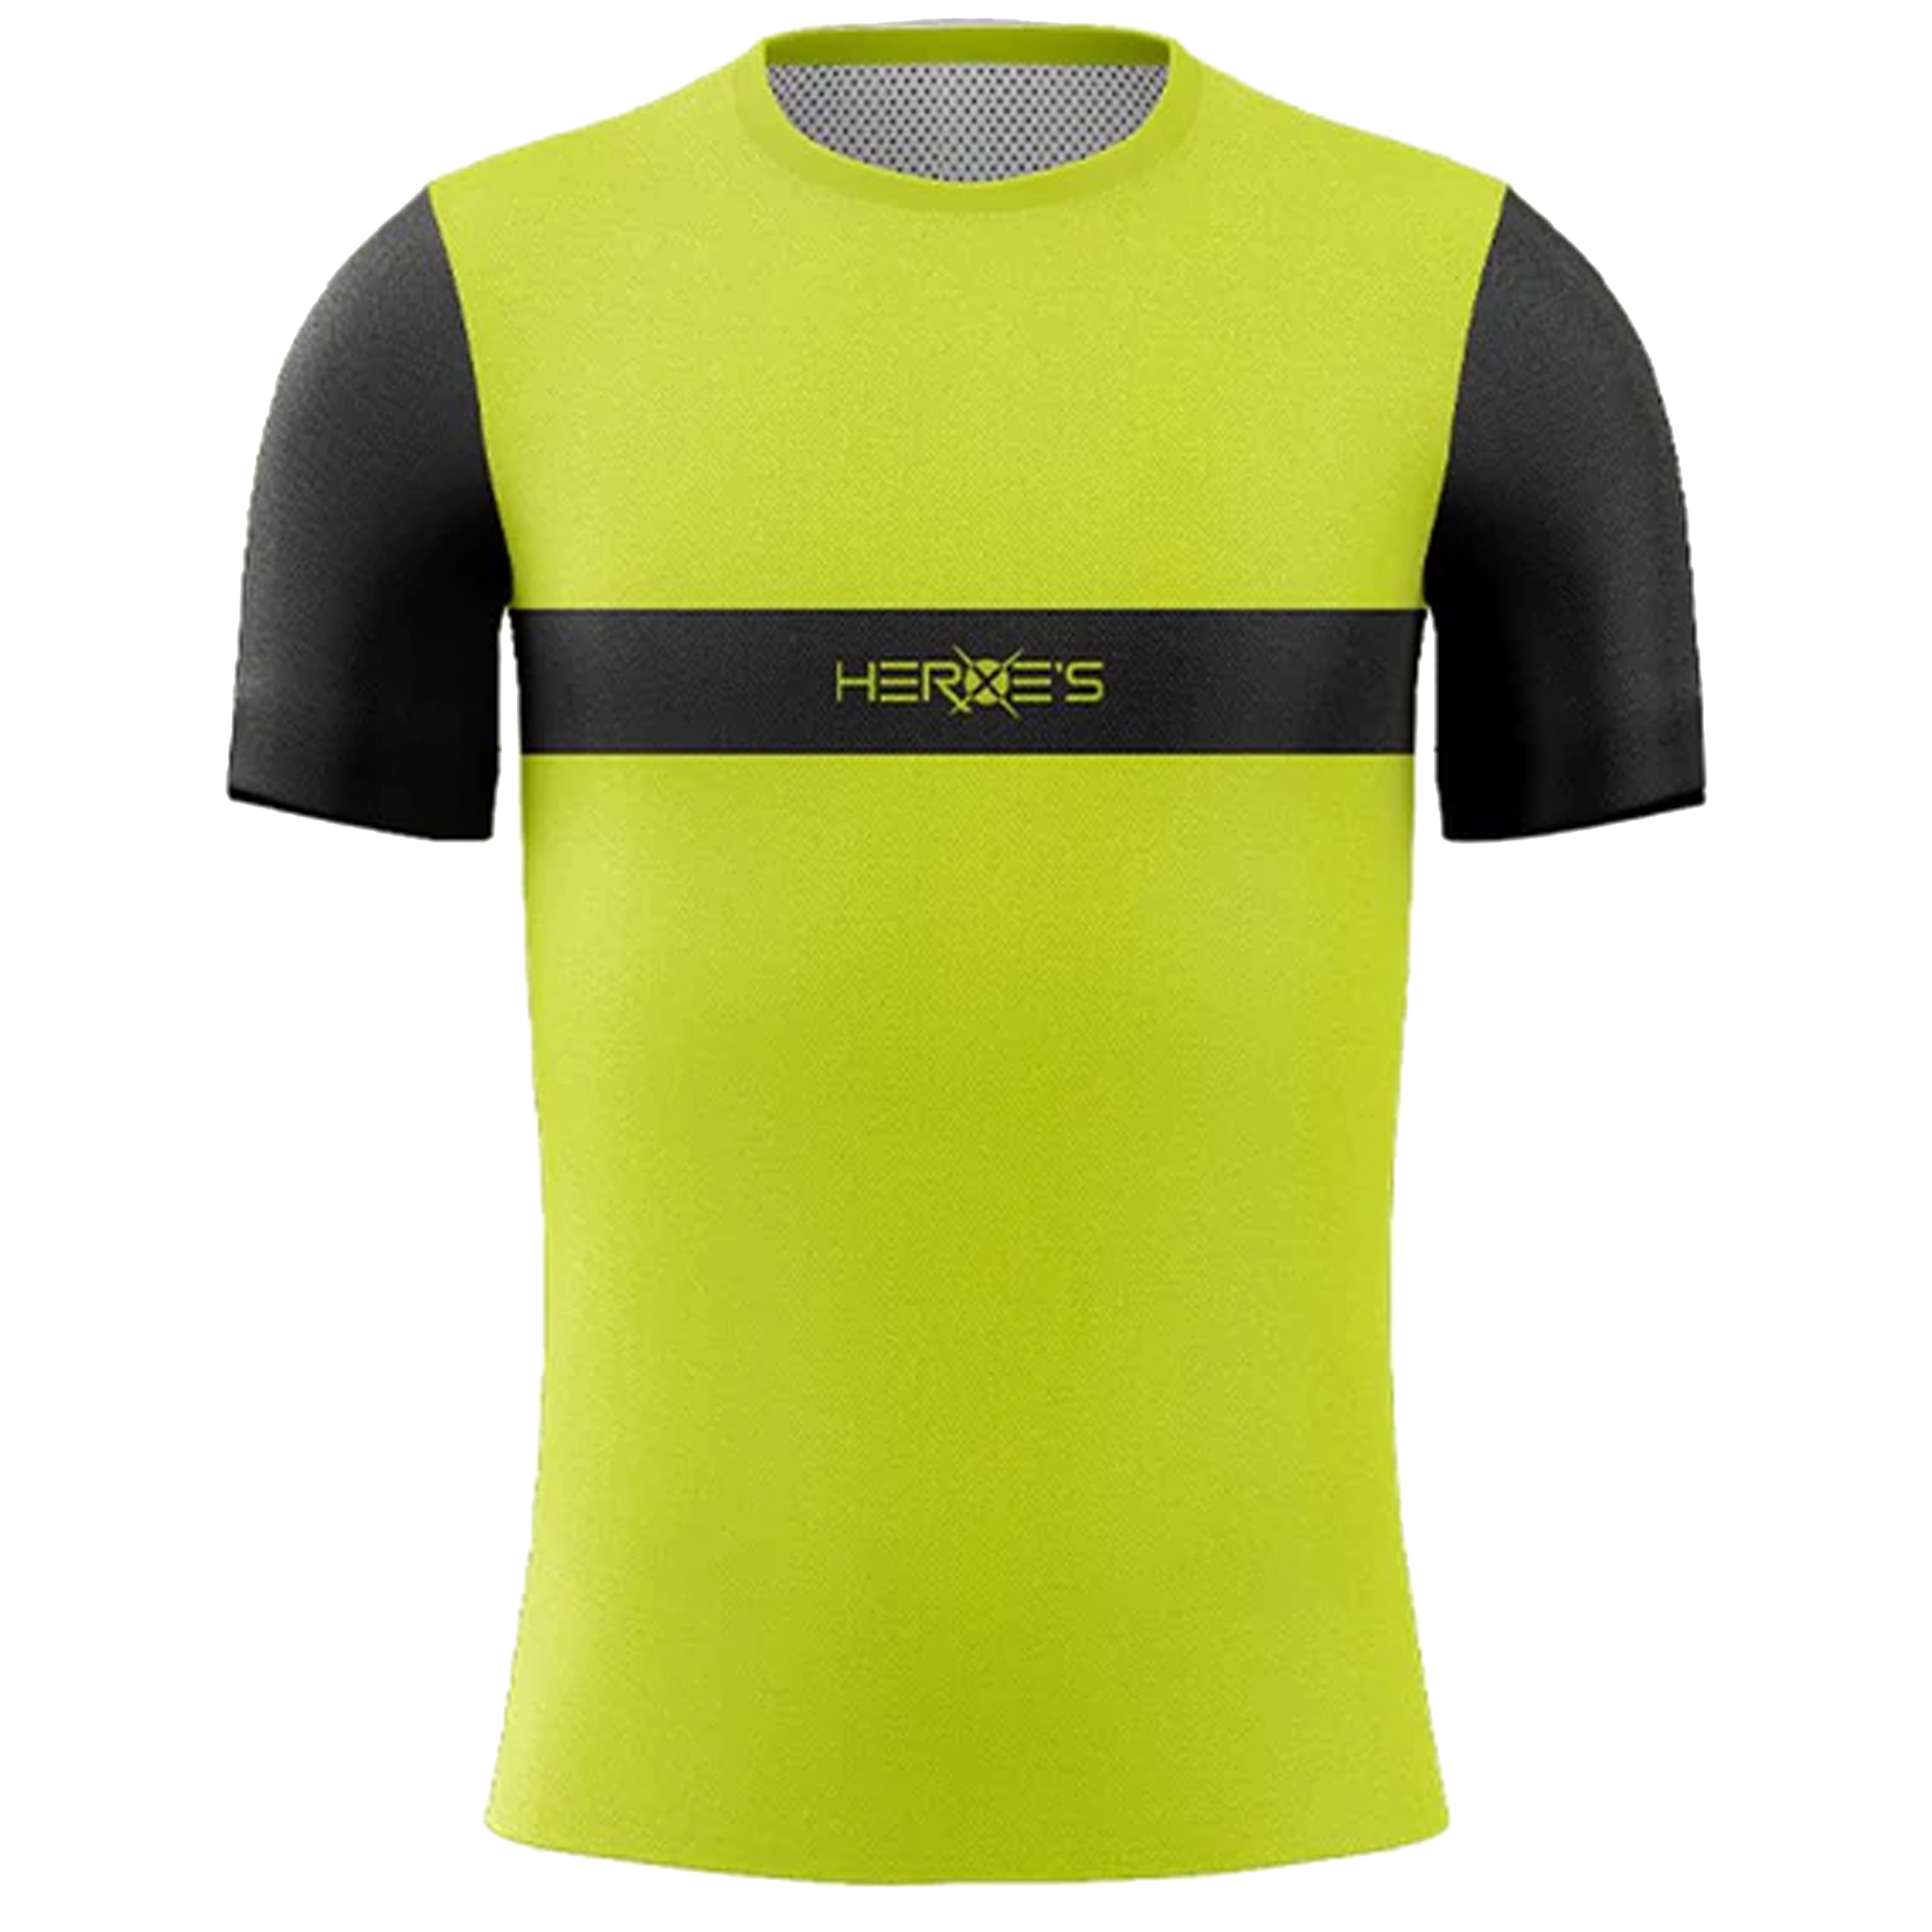 Heroes #FLUO T-Shirt